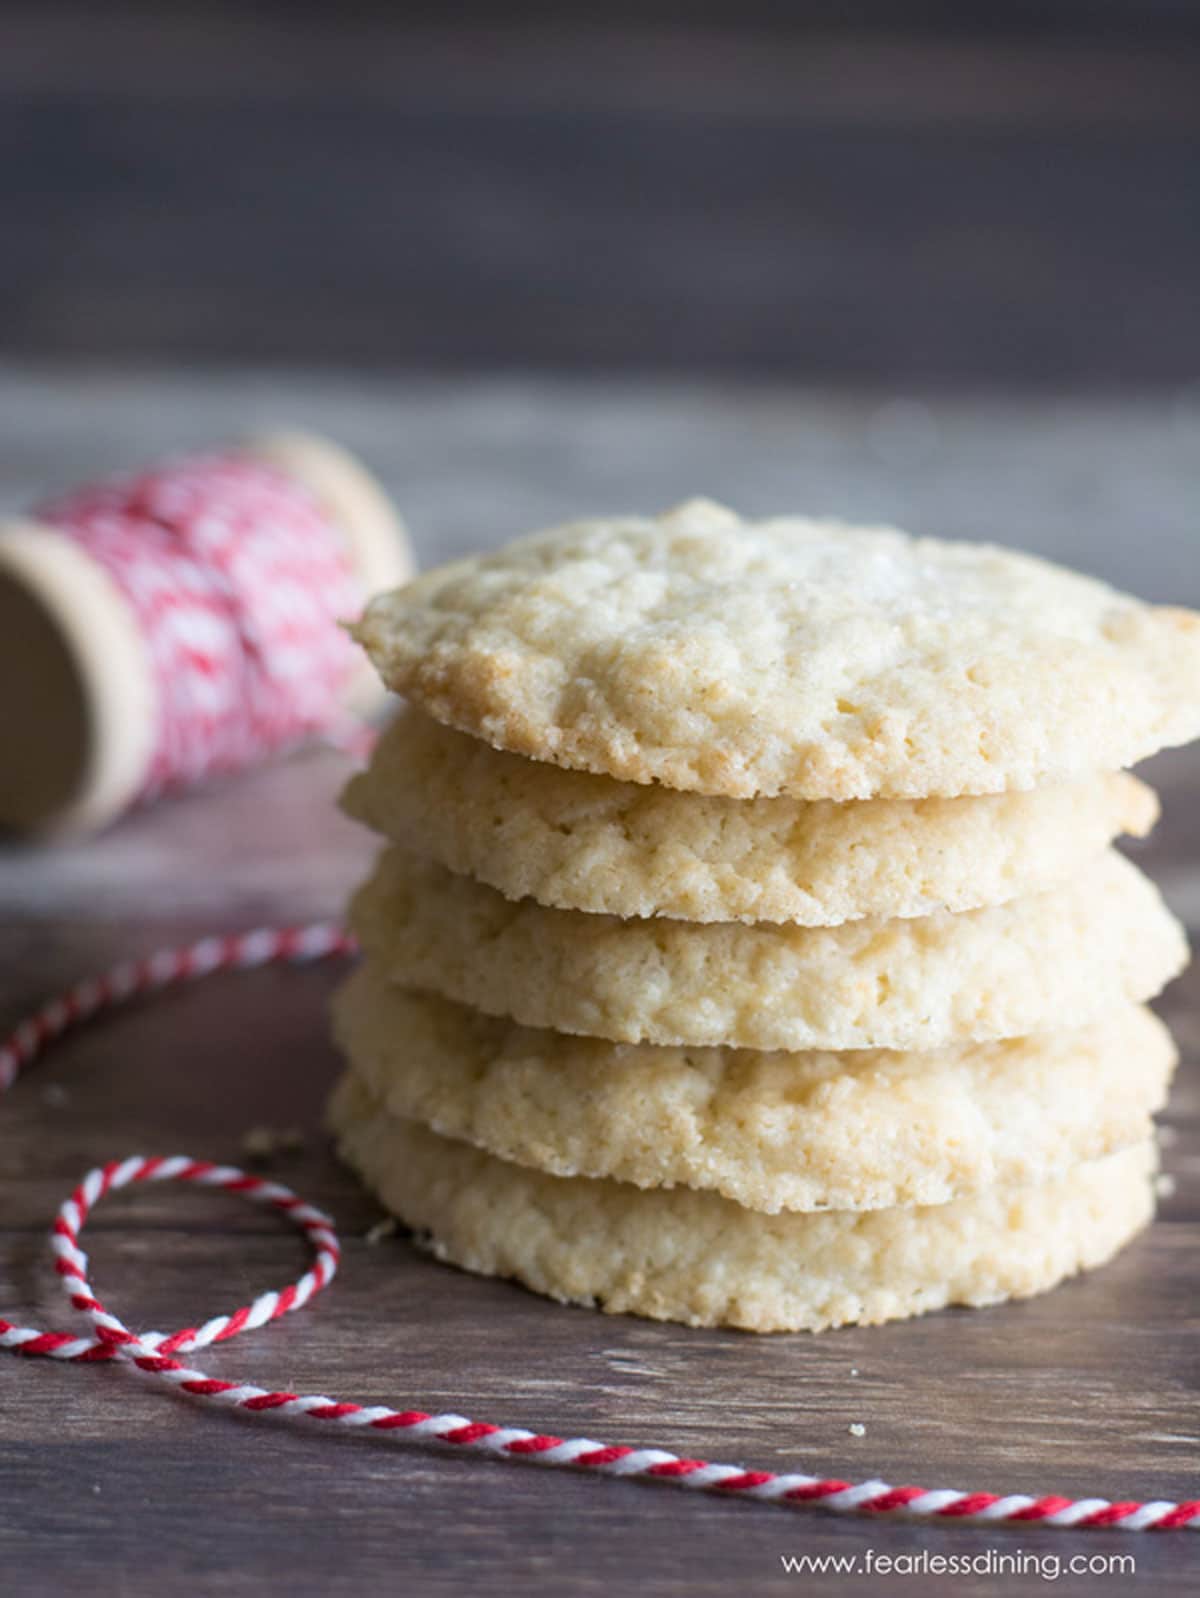 A stack of five sugar cookies next to a spool of white and red striped string.